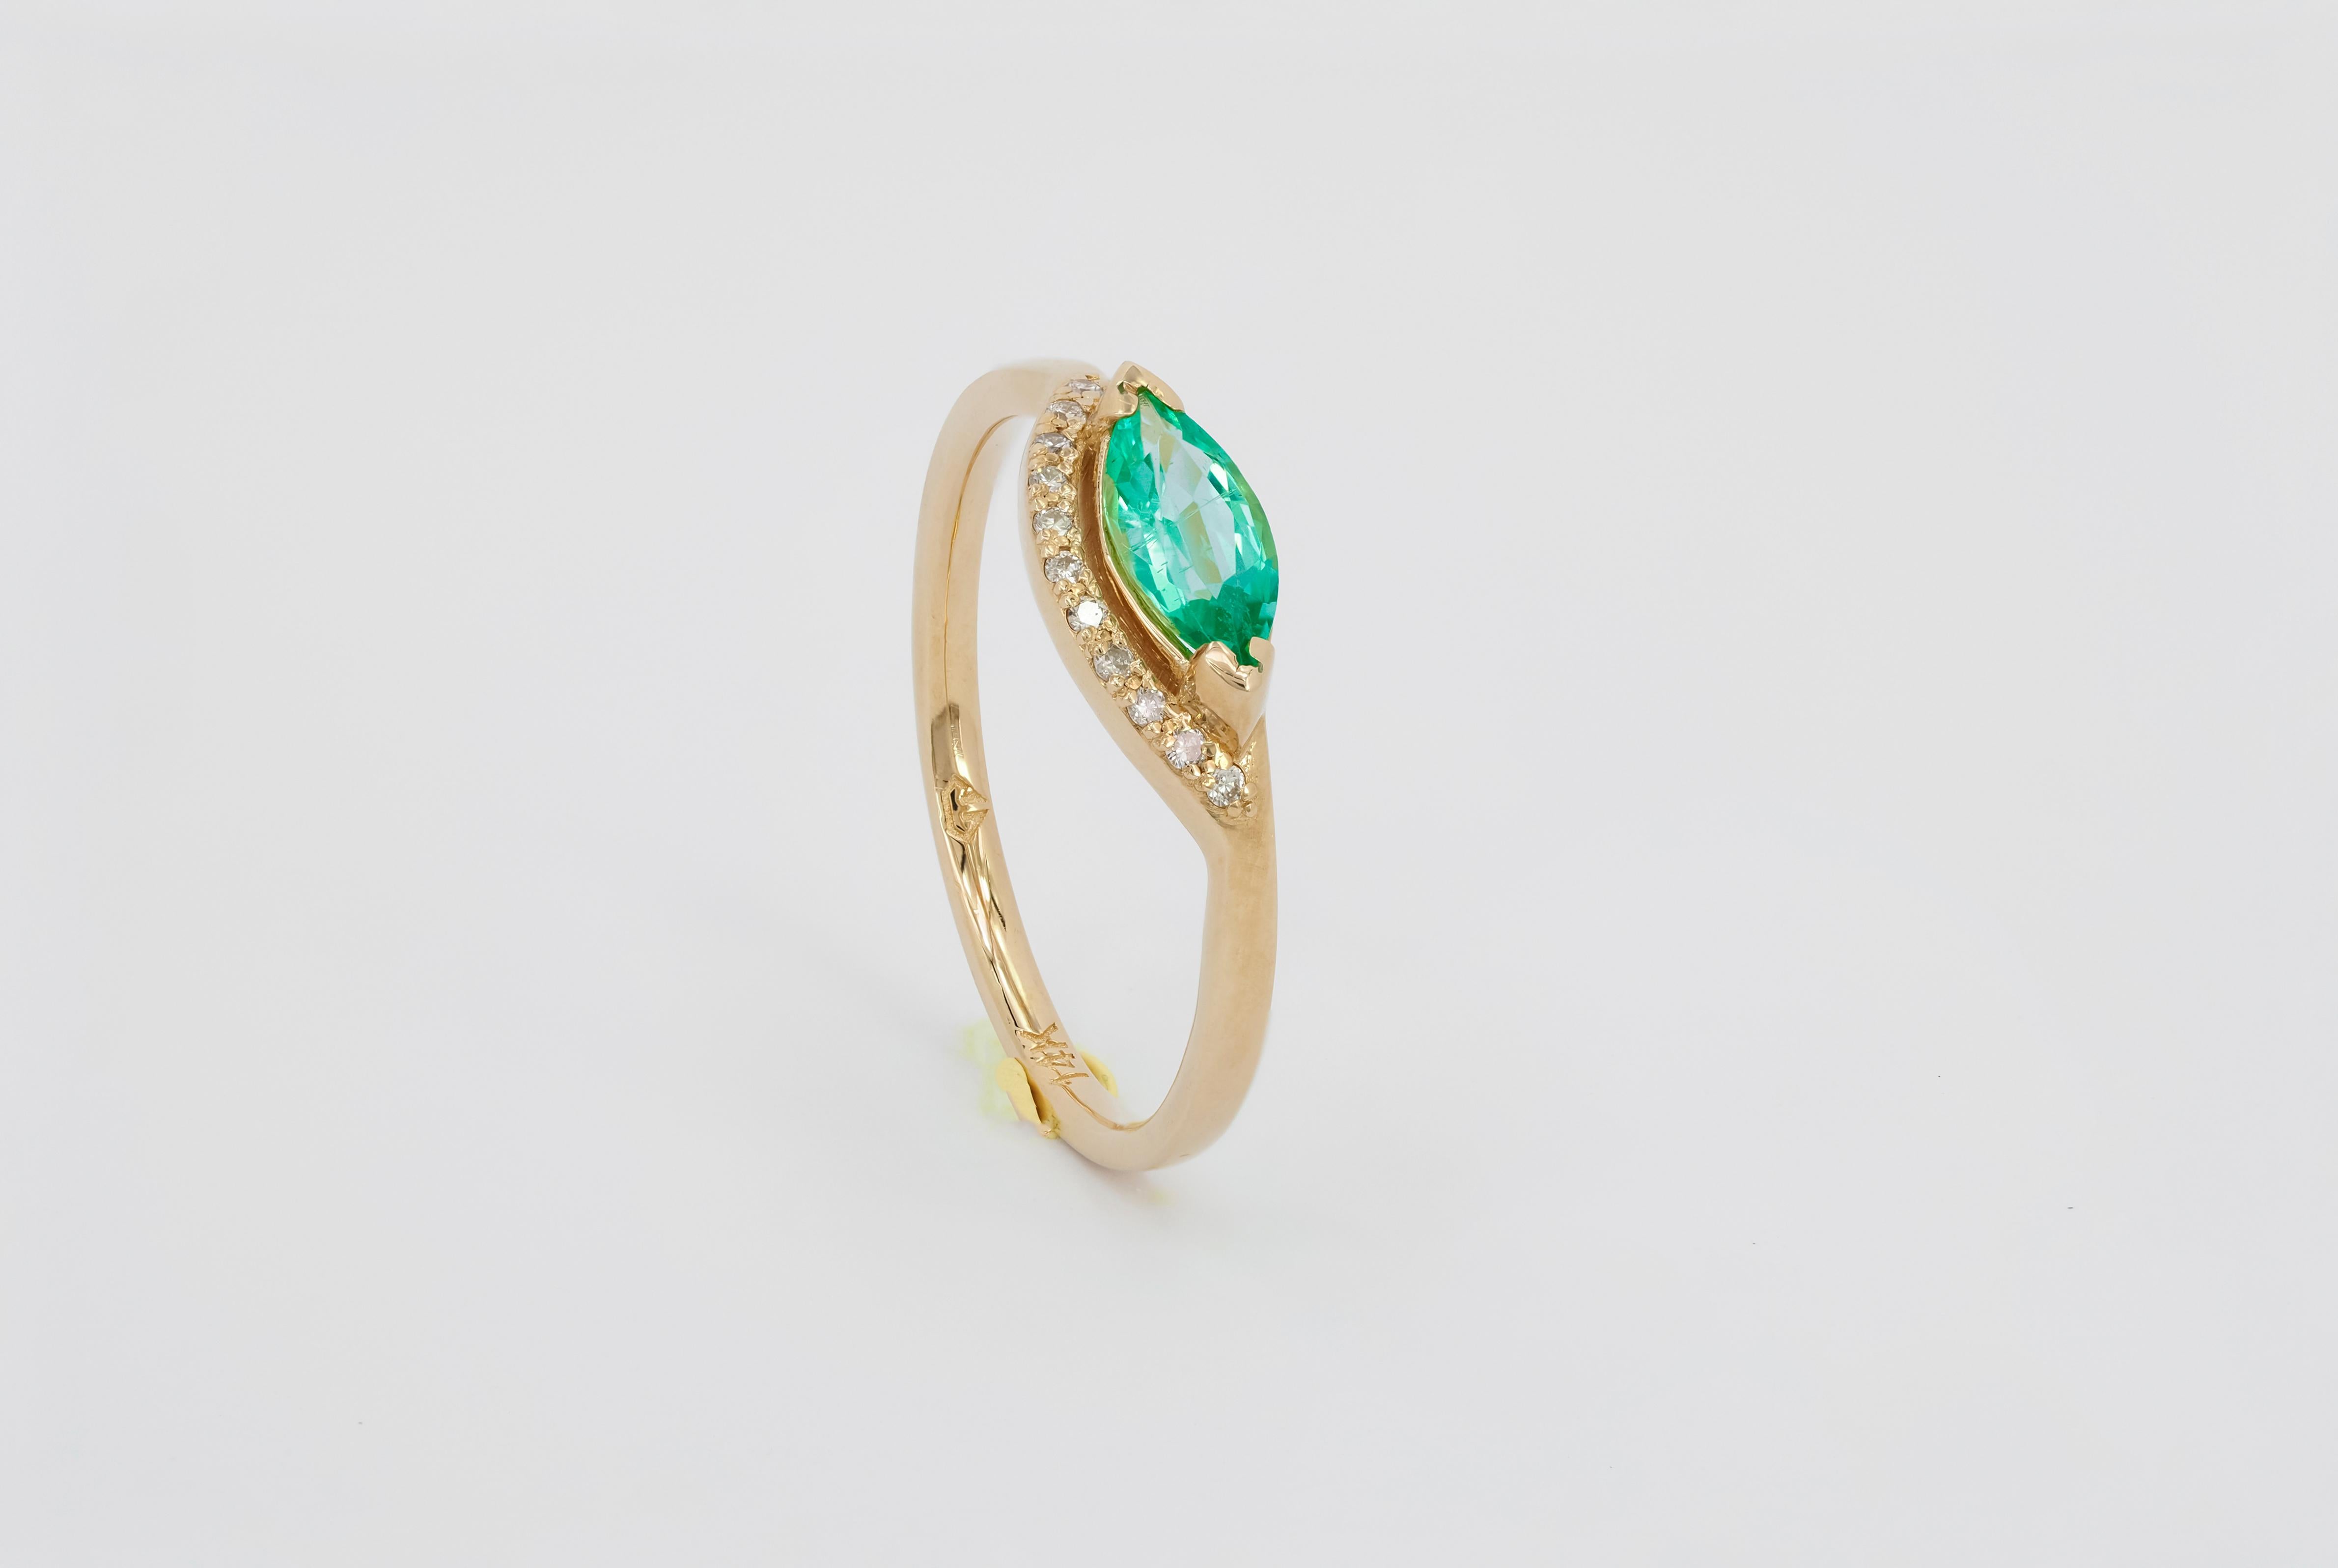 For Sale:  14 K Gold Ring with Marquise Cut Emerald and Diamonds 8